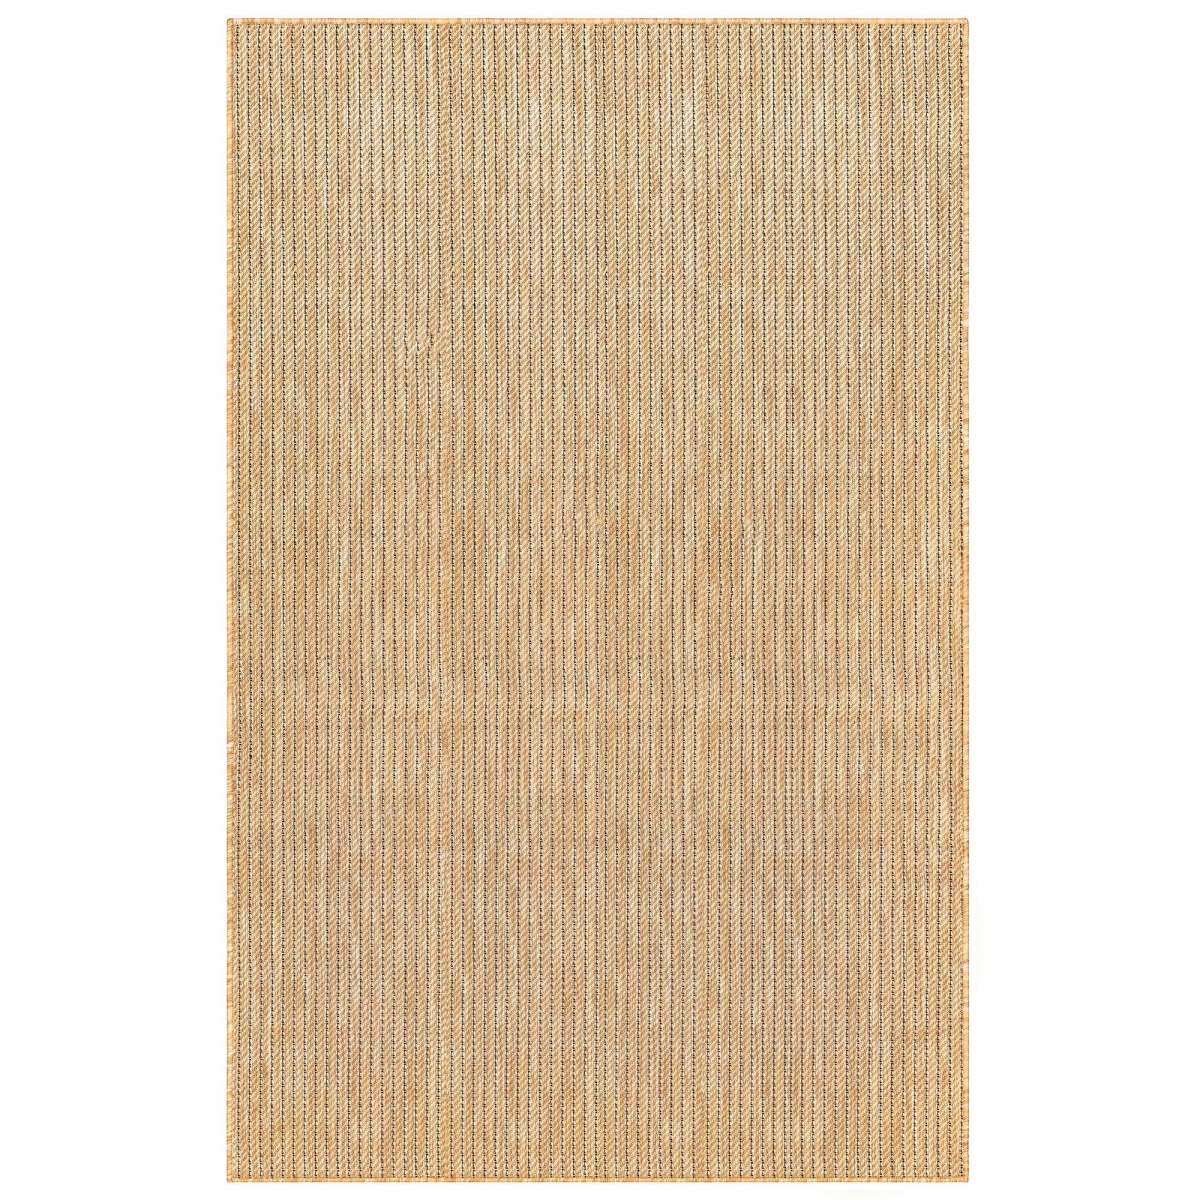 Trans-ocean Imports Cre58842212 4 Ft. 10 In. X 7 Ft. 6 In. Liora Manne Carmel Texture Stripe Indoor & Outdoor Wilton Woven Rectangle Rug - Sand